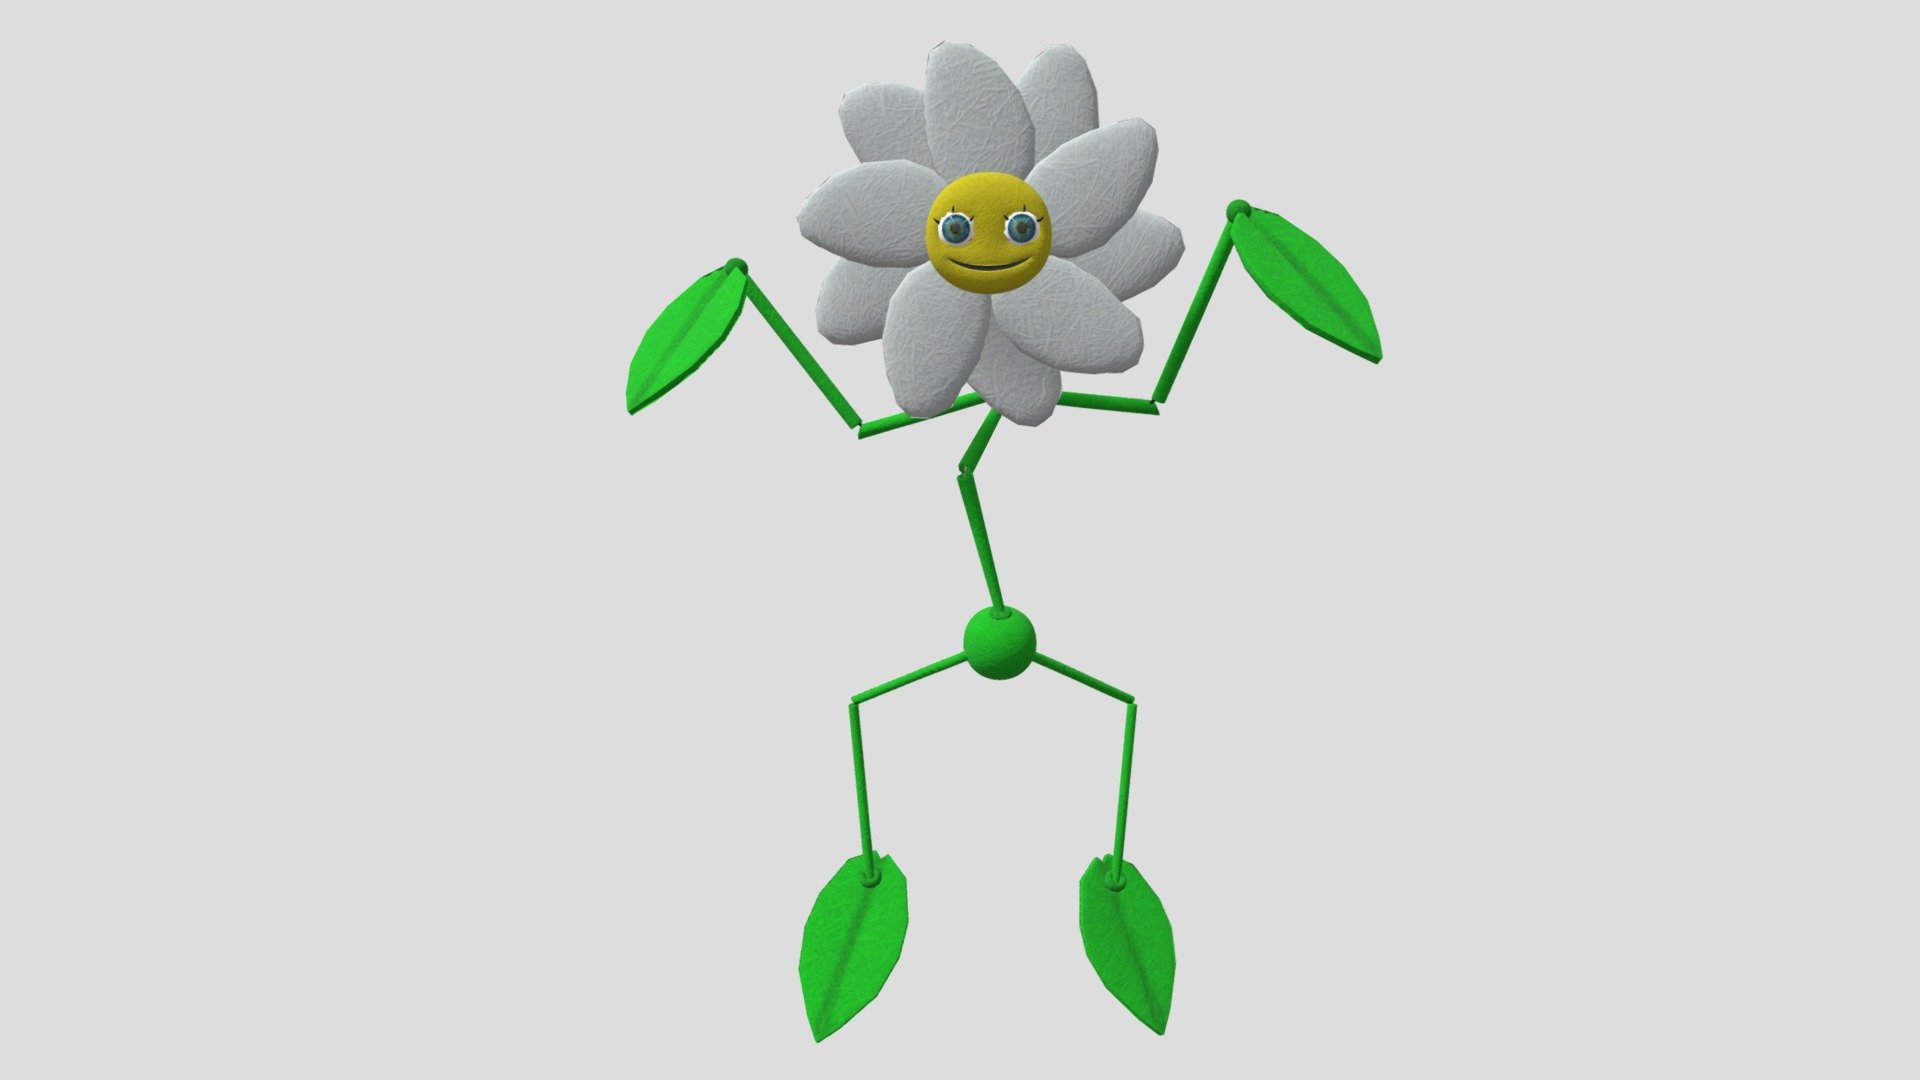 This took a while

If you use this model please give credit - Poppy Playtime | Daisy - Download Free 3D model by Xoffly 3d model